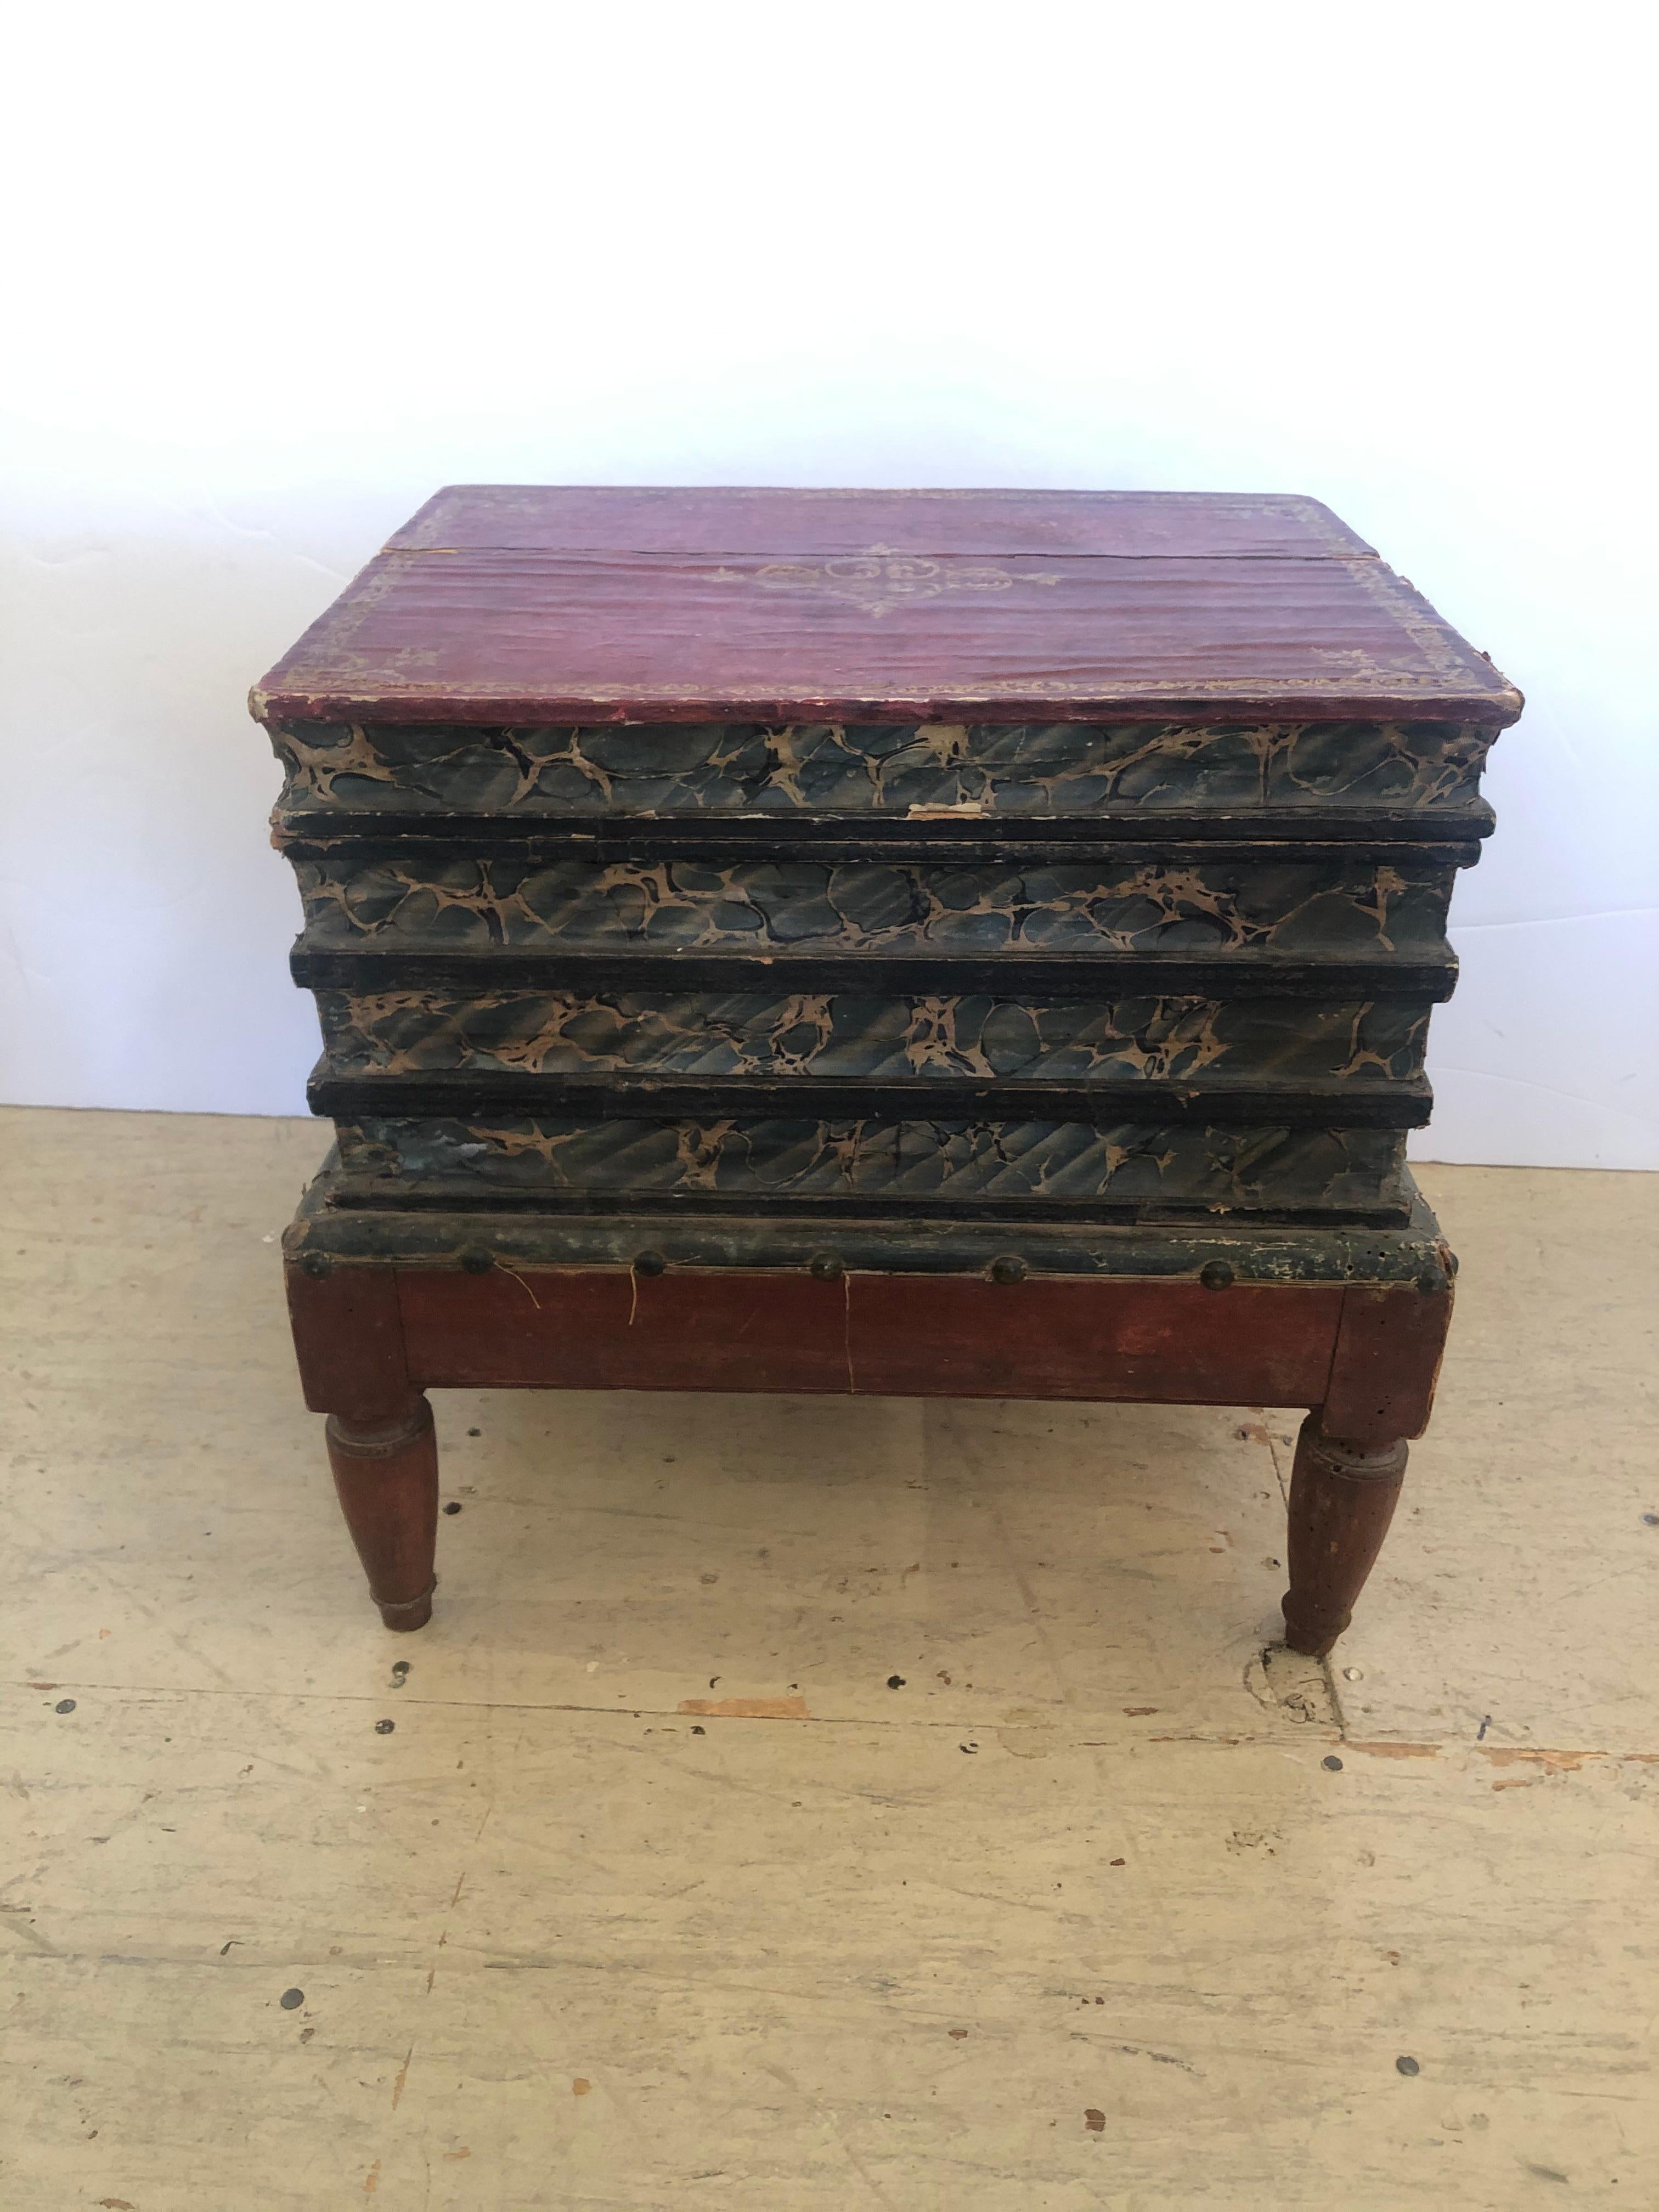 A rare character rich 19th century jewel of a side table and decorative box in the shape of stacked books on stand, having original Italian wrapped paper on wood, and lid that opens to reveal storage and cubby inside. Intentionally left in